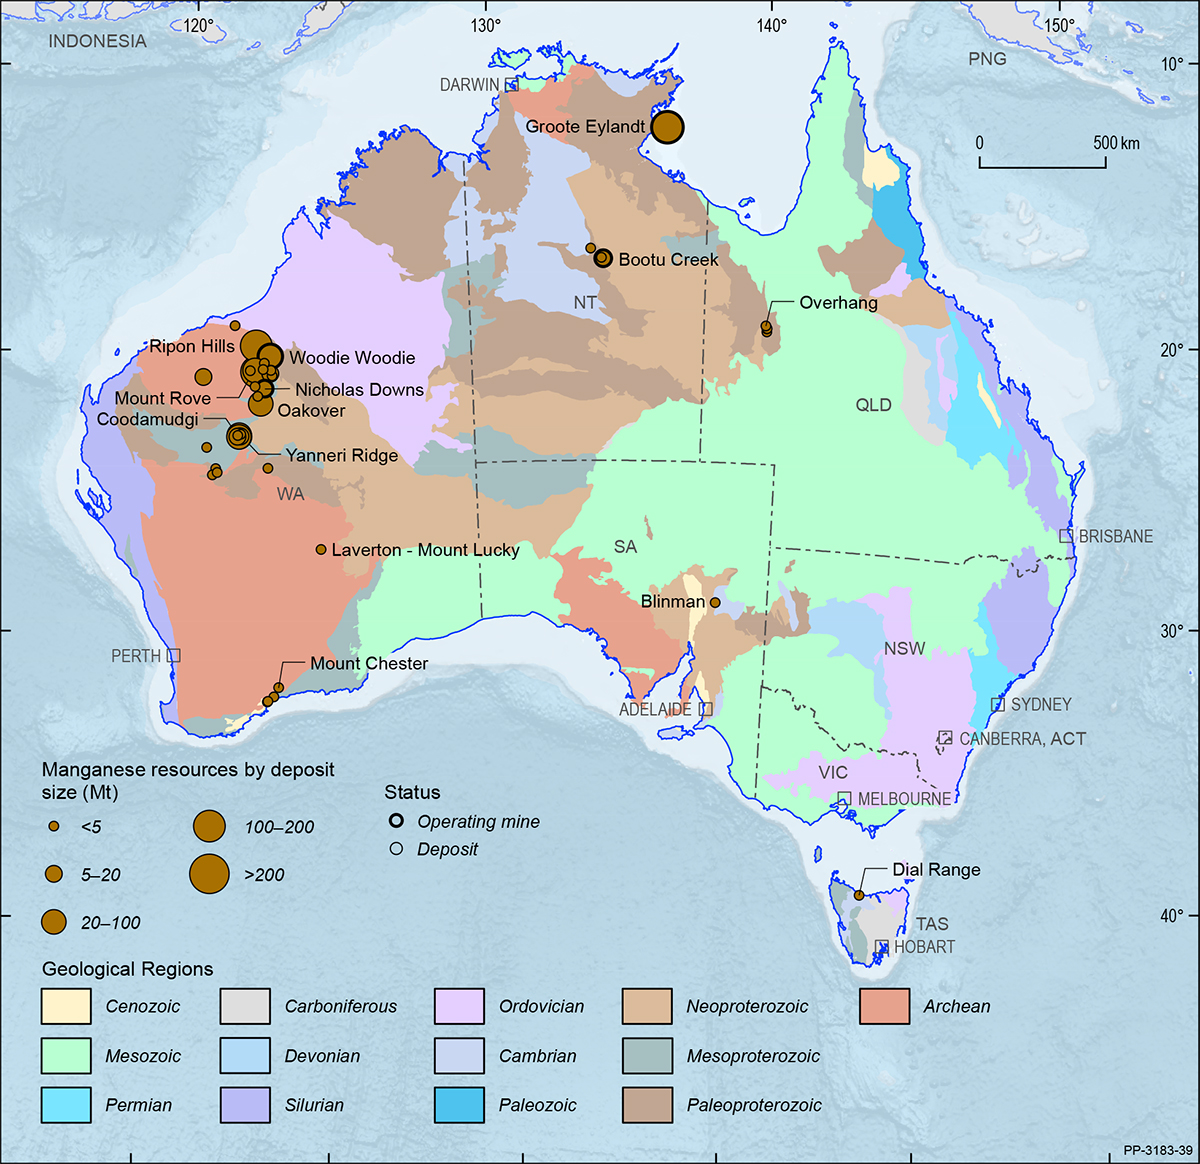 A map showing the Australian continent shaded by the ages of the main geological provinces highlighting the geographical distribution of Australian manganese deposits and operating mines in 2019.